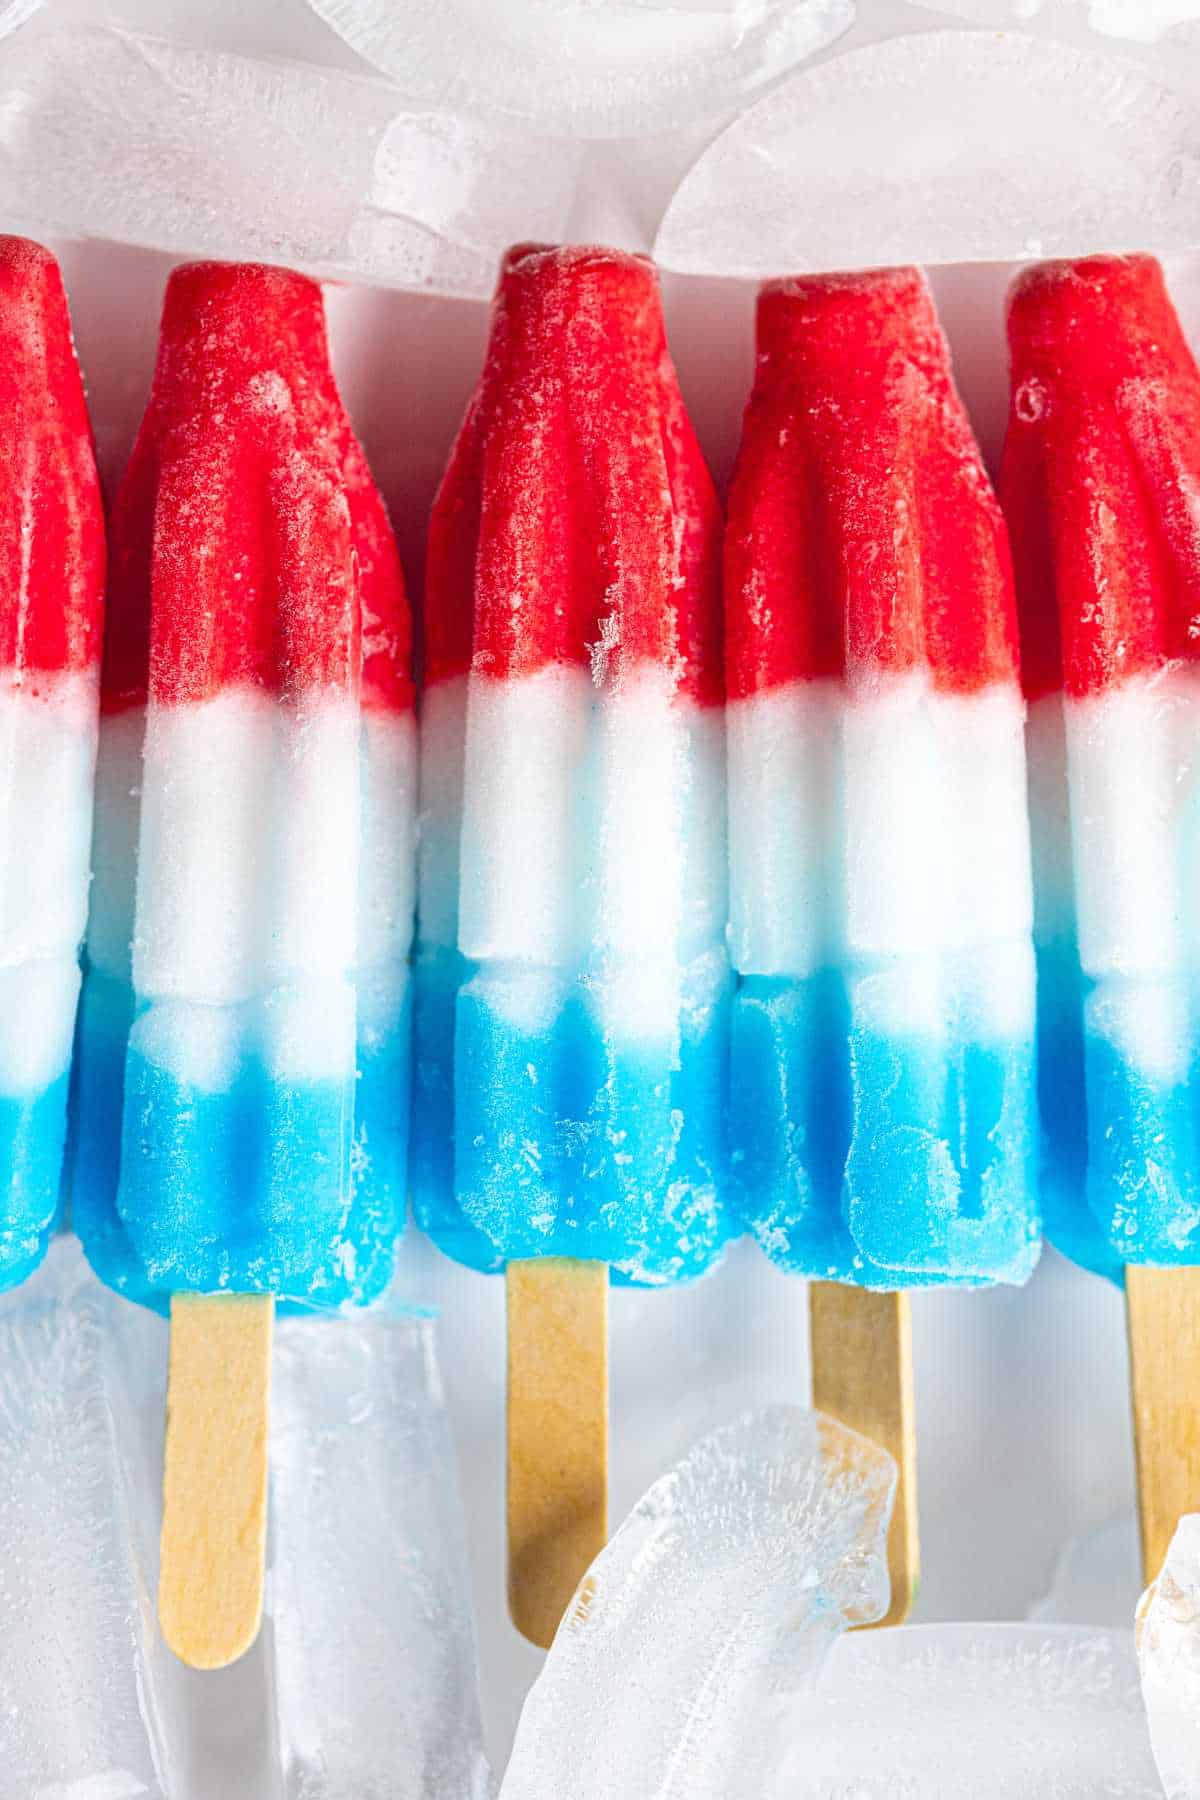 red white and blue popsicles on a tray of ice cubes.